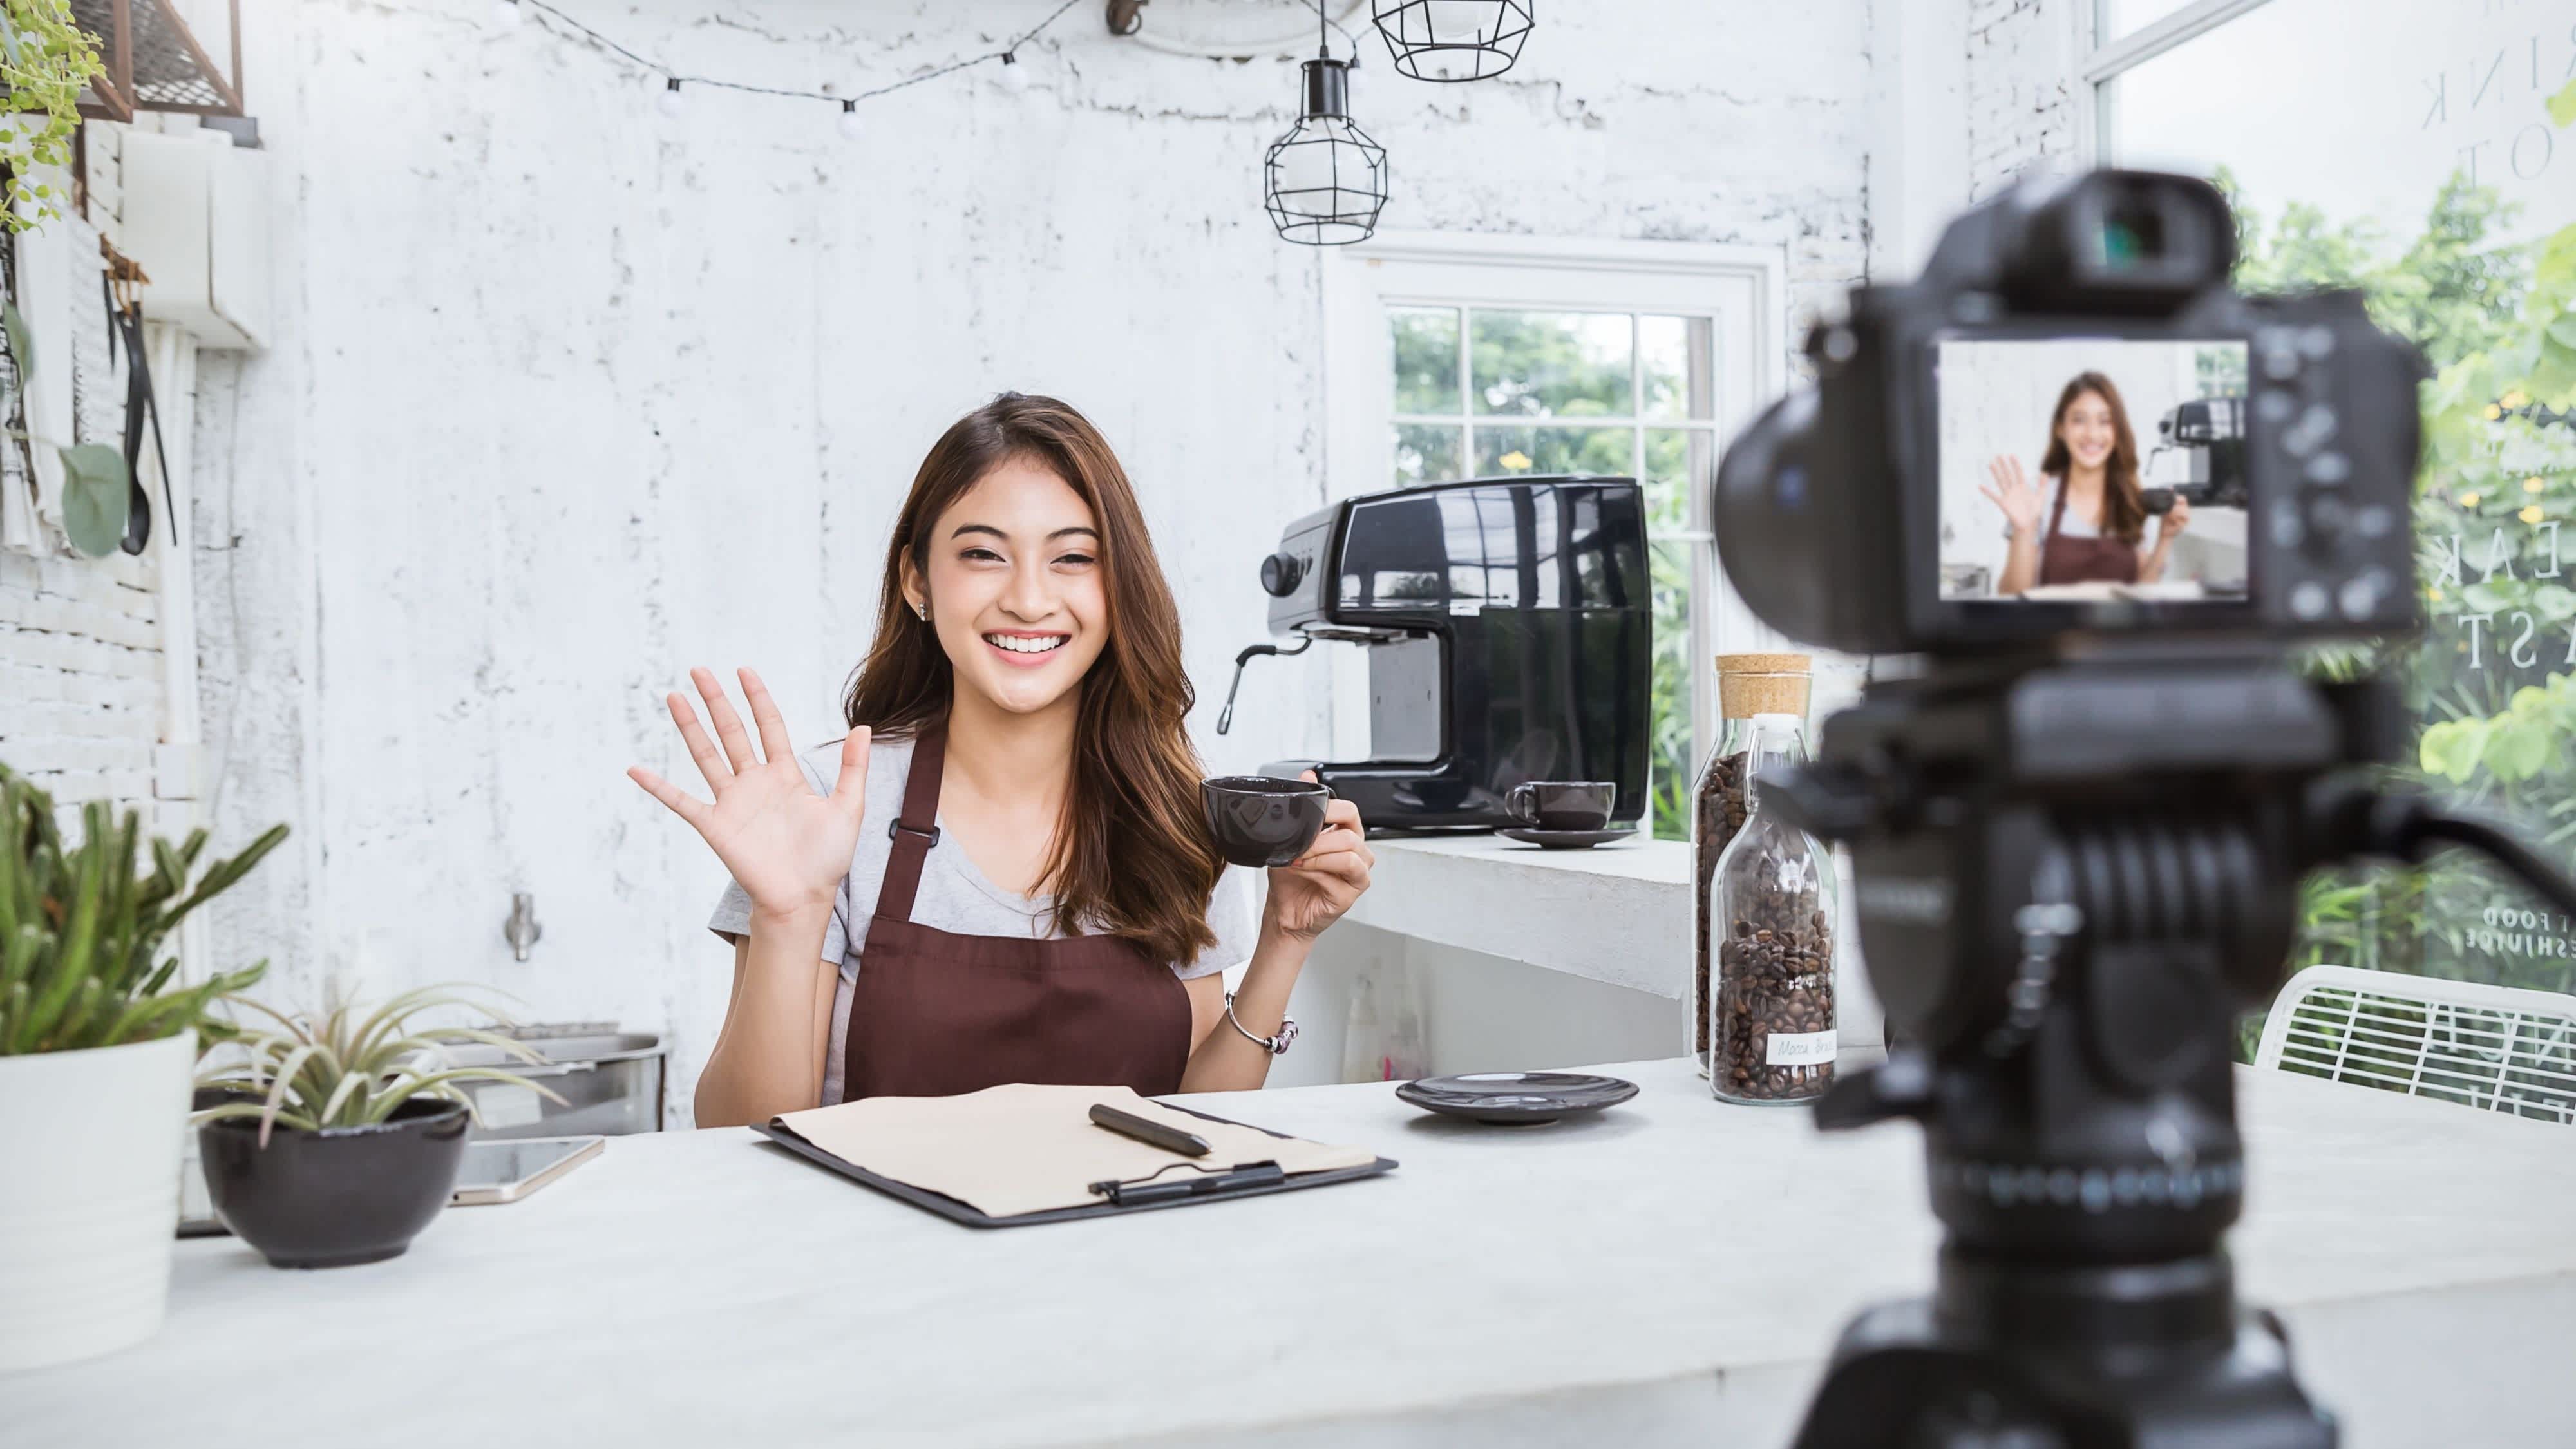 How to move your food business online with video marketing